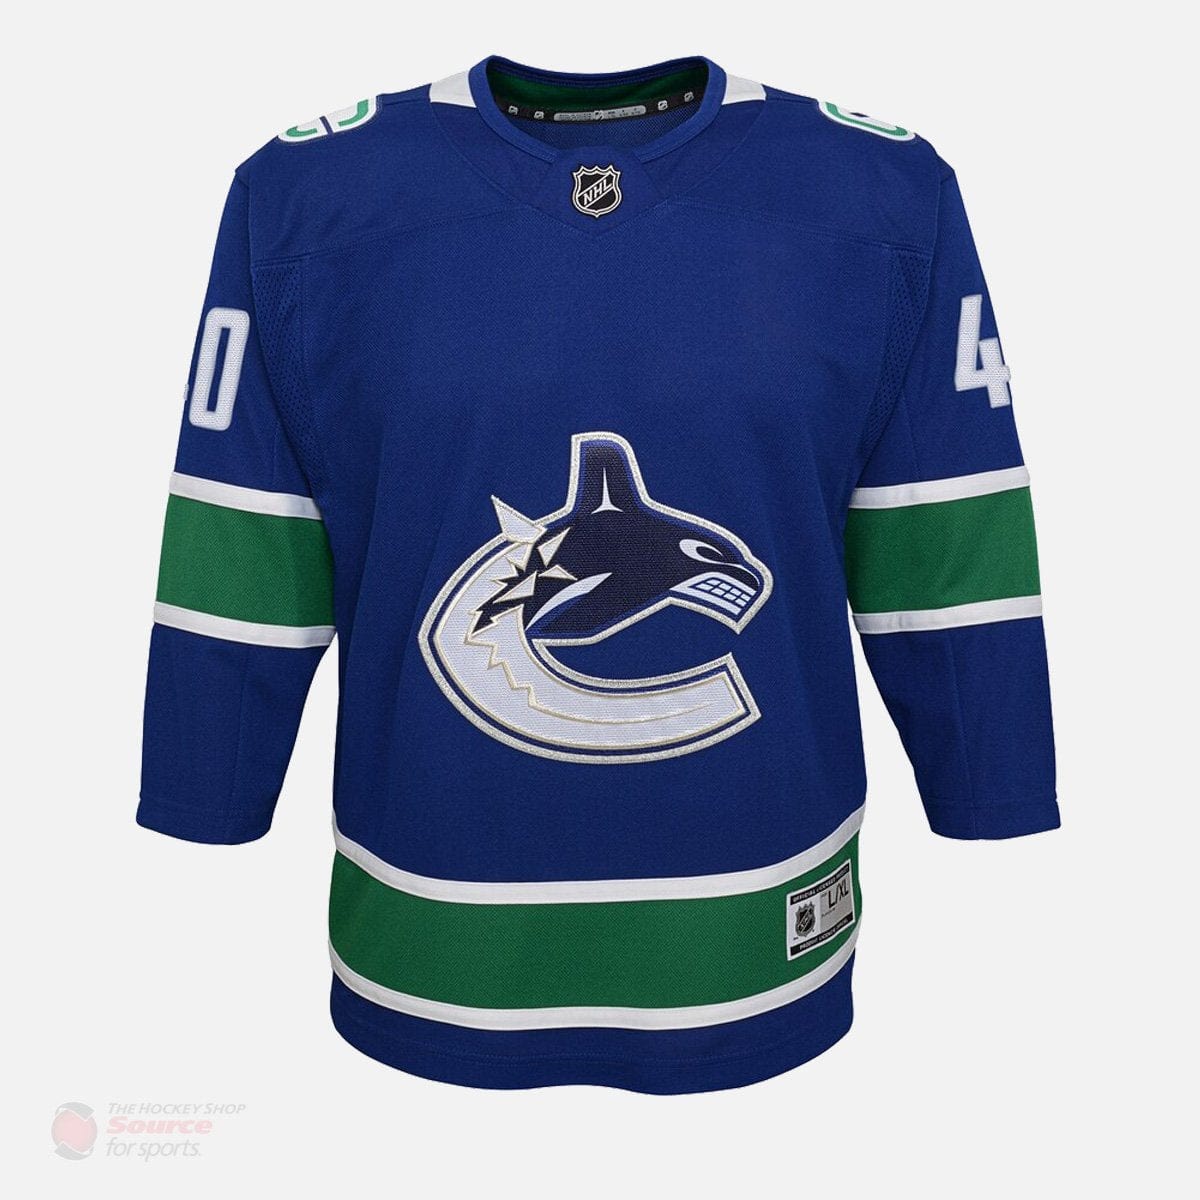 Vancouver Canucks Outer Stuff Premier Youth Home Jersey - Elias Pettersson